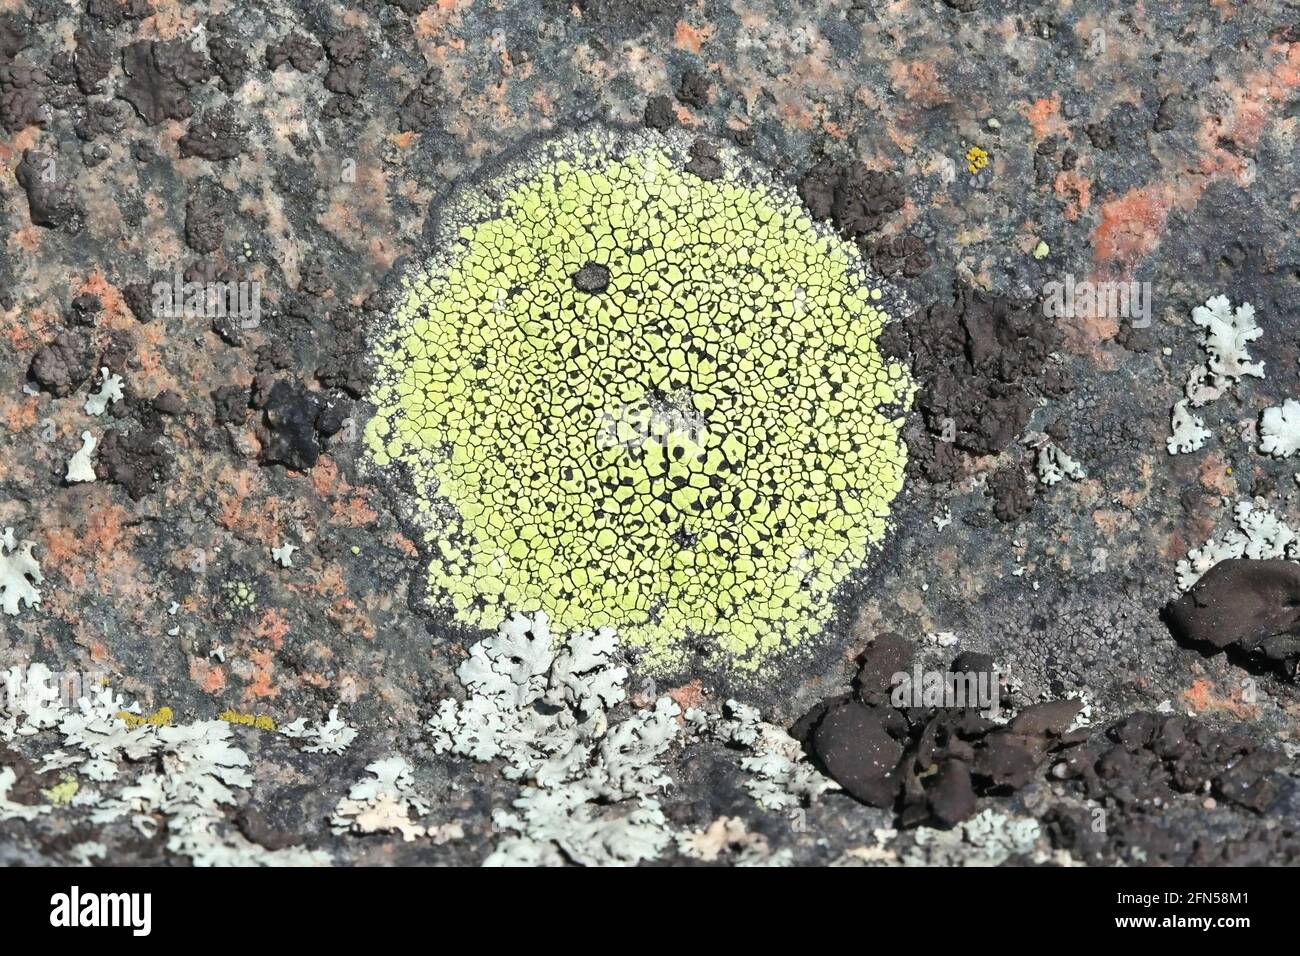 Rhizocarpon geographicum,  known as map lichen.  Map lichens are considered the oldest living organism on Earth, age-estimated at 8,600 years. Stock Photo